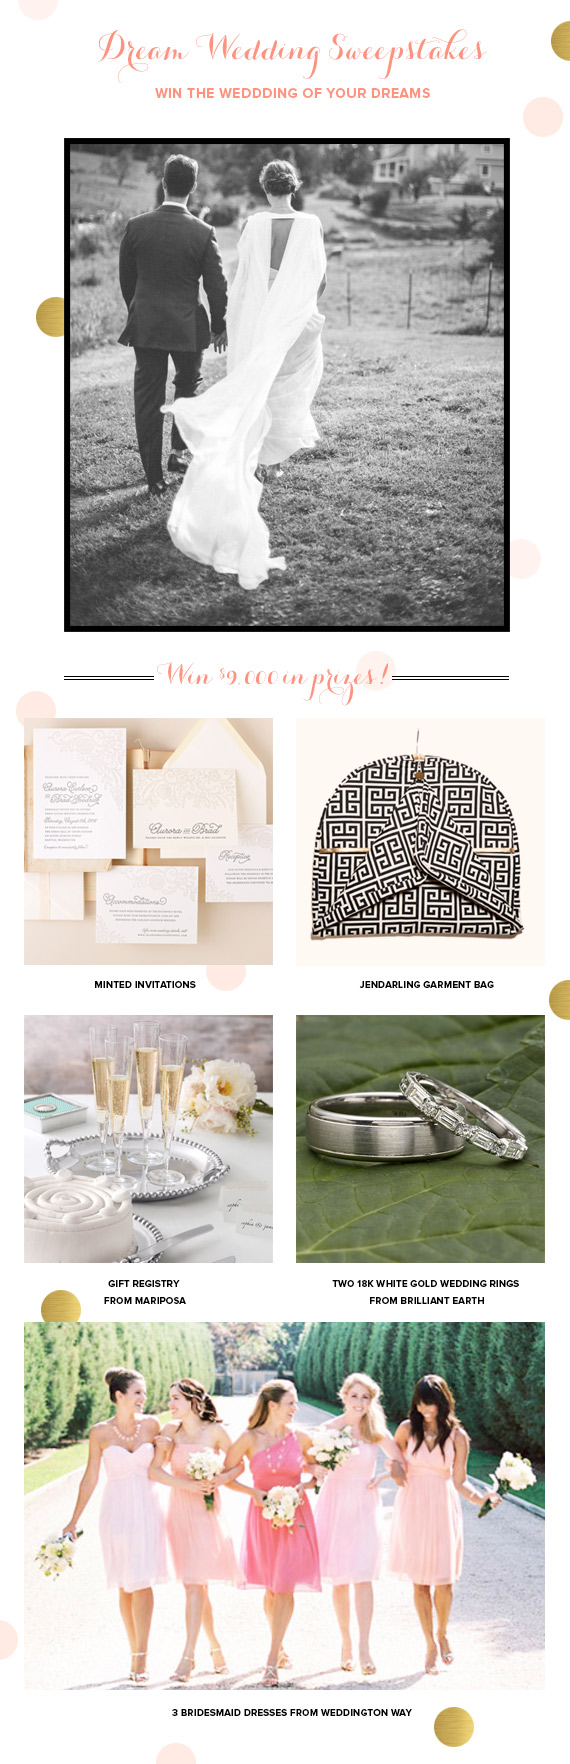 Win a dream wedding package by Minted | Sweepstakes | 100 Layer Cake